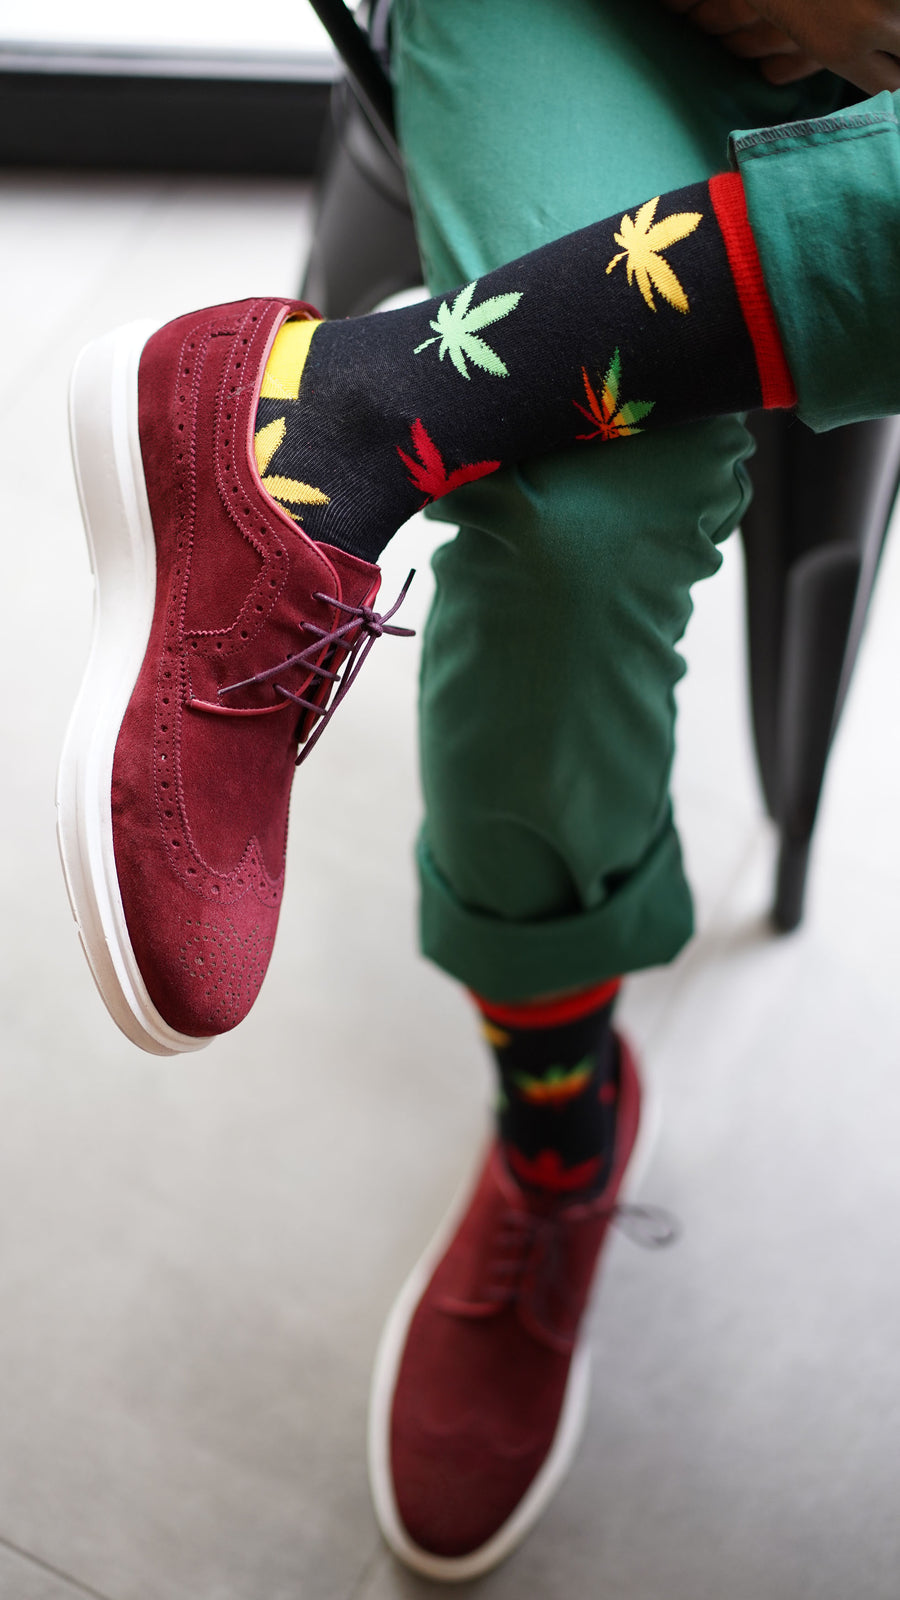 Men's Colorful Weed Socks black, yellow and green